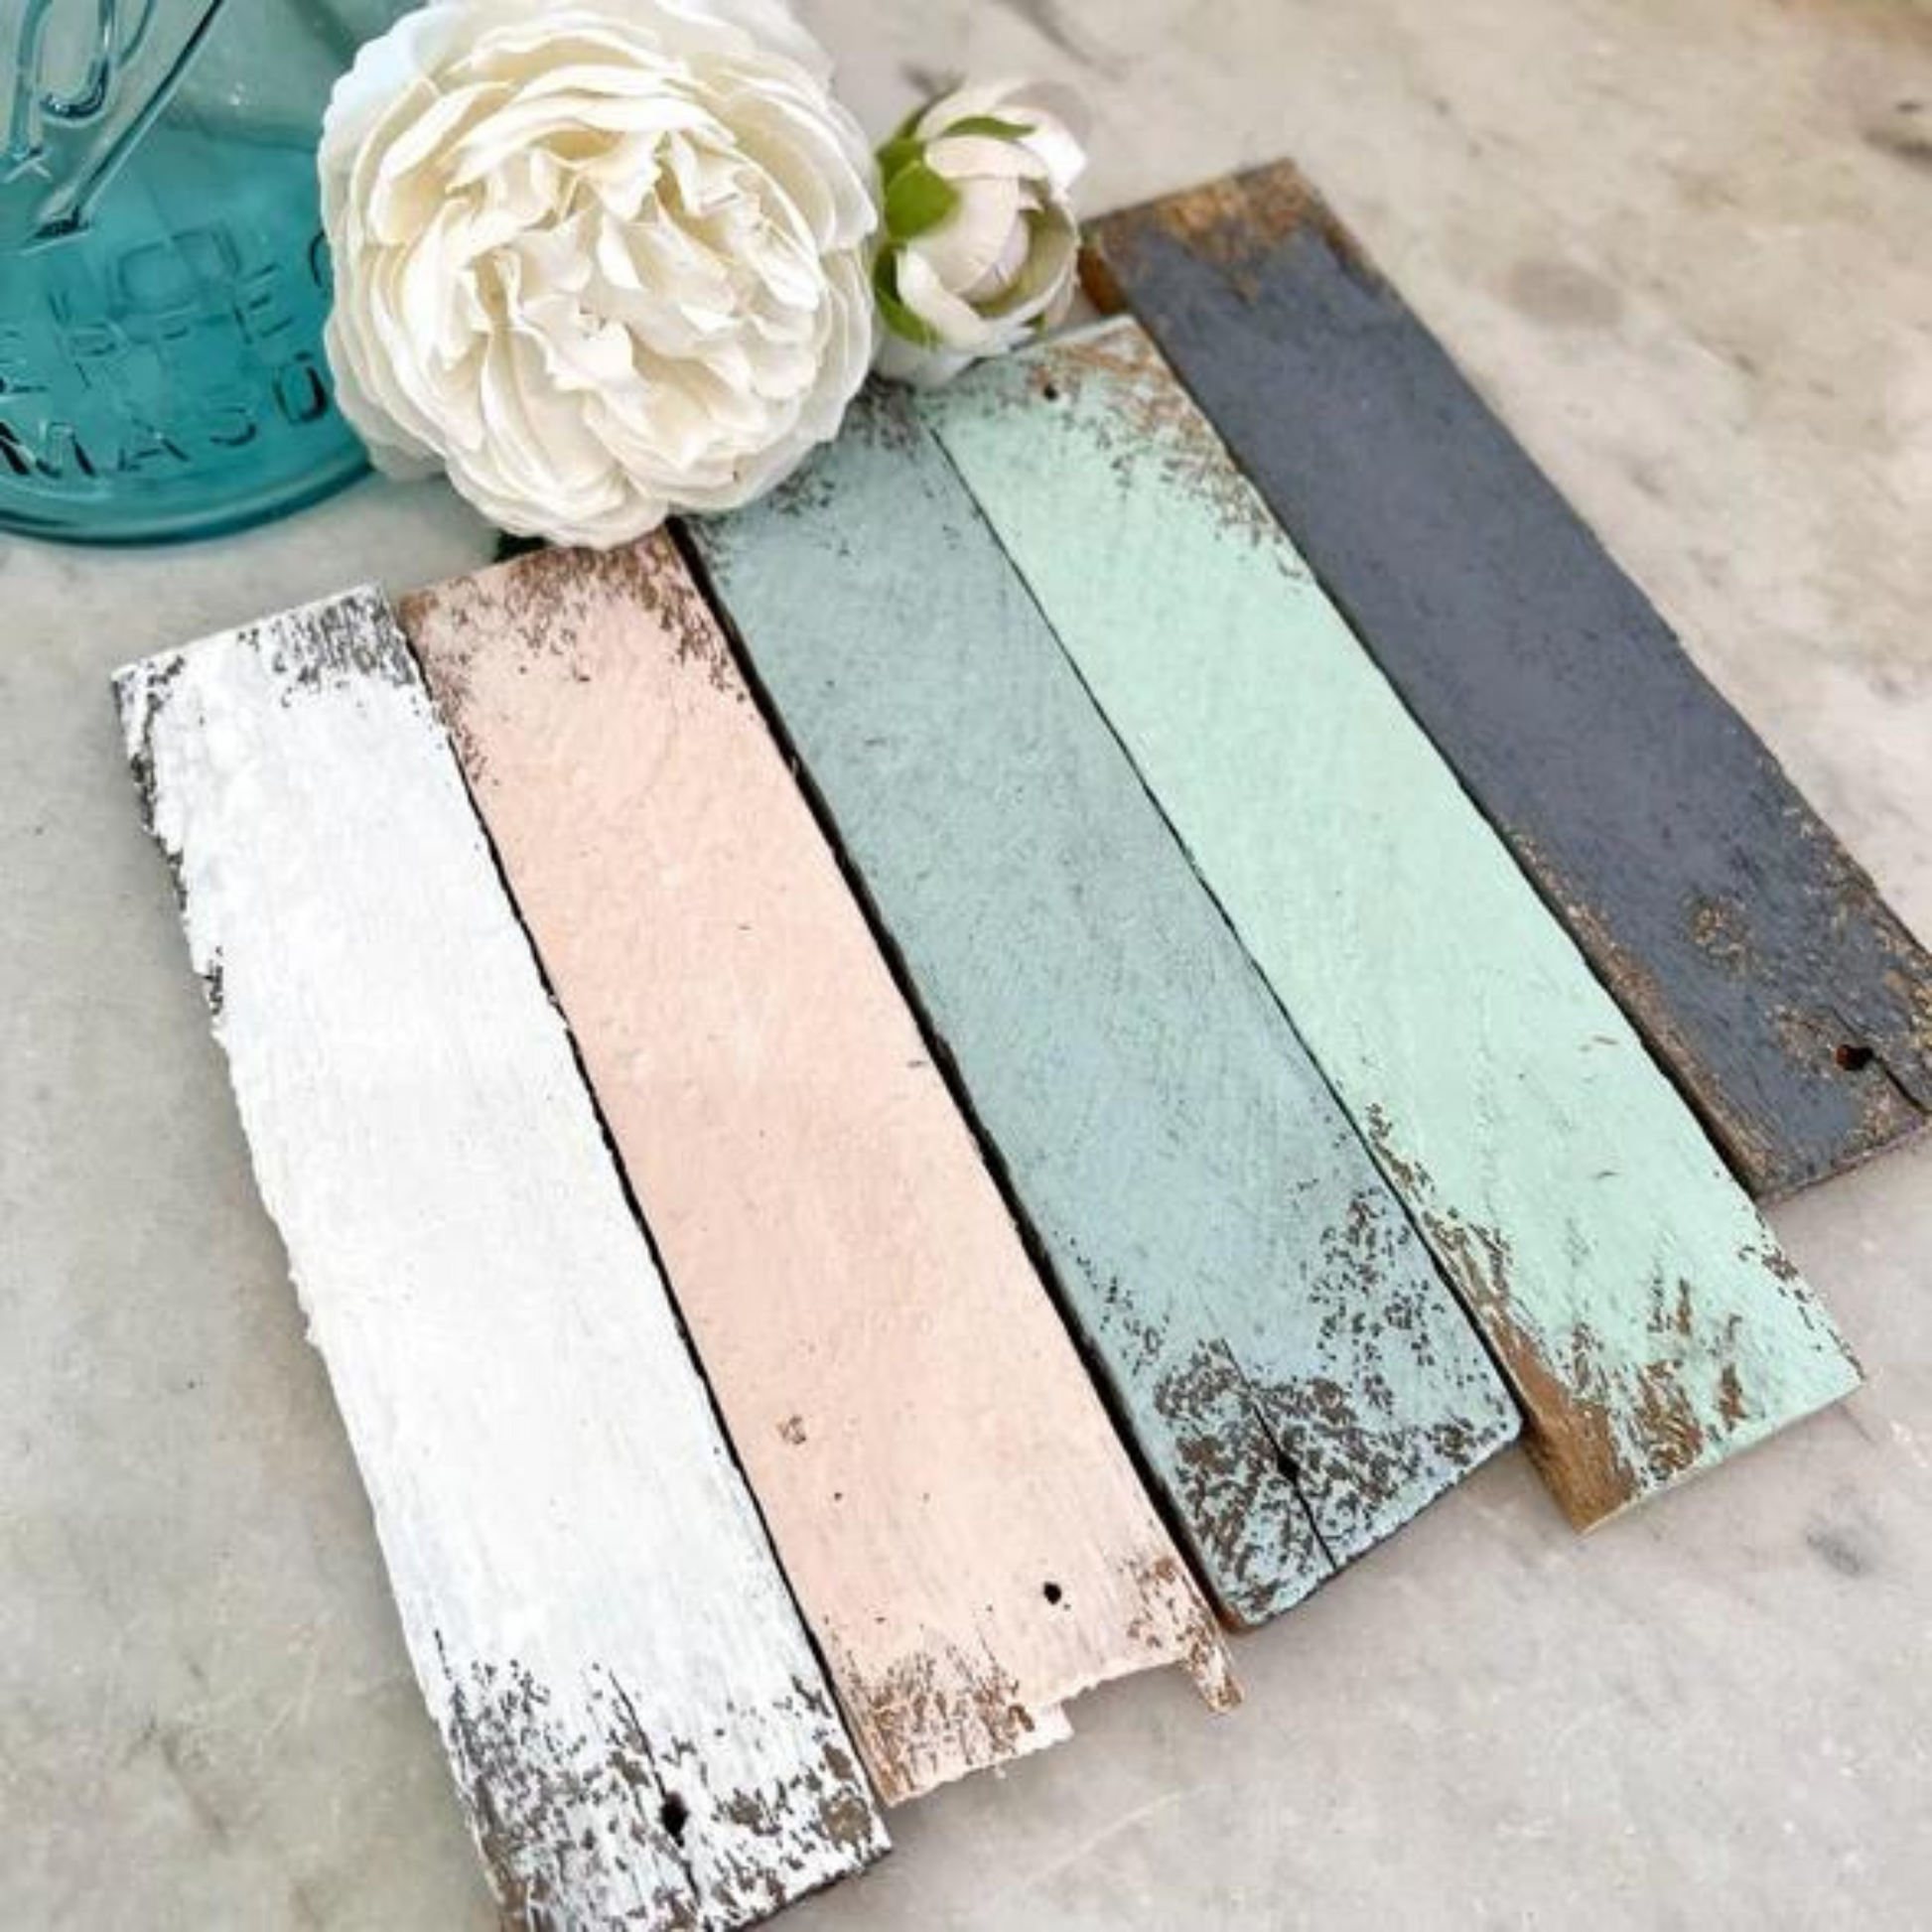 DIY Cottage Color Paint curated by Jamie Ray Vintage.  Product color examples of White Linen, Vintage Pink, Haint Blue, Vintage Mint and Grey Skies. Available in pints at Milton's Daughter.